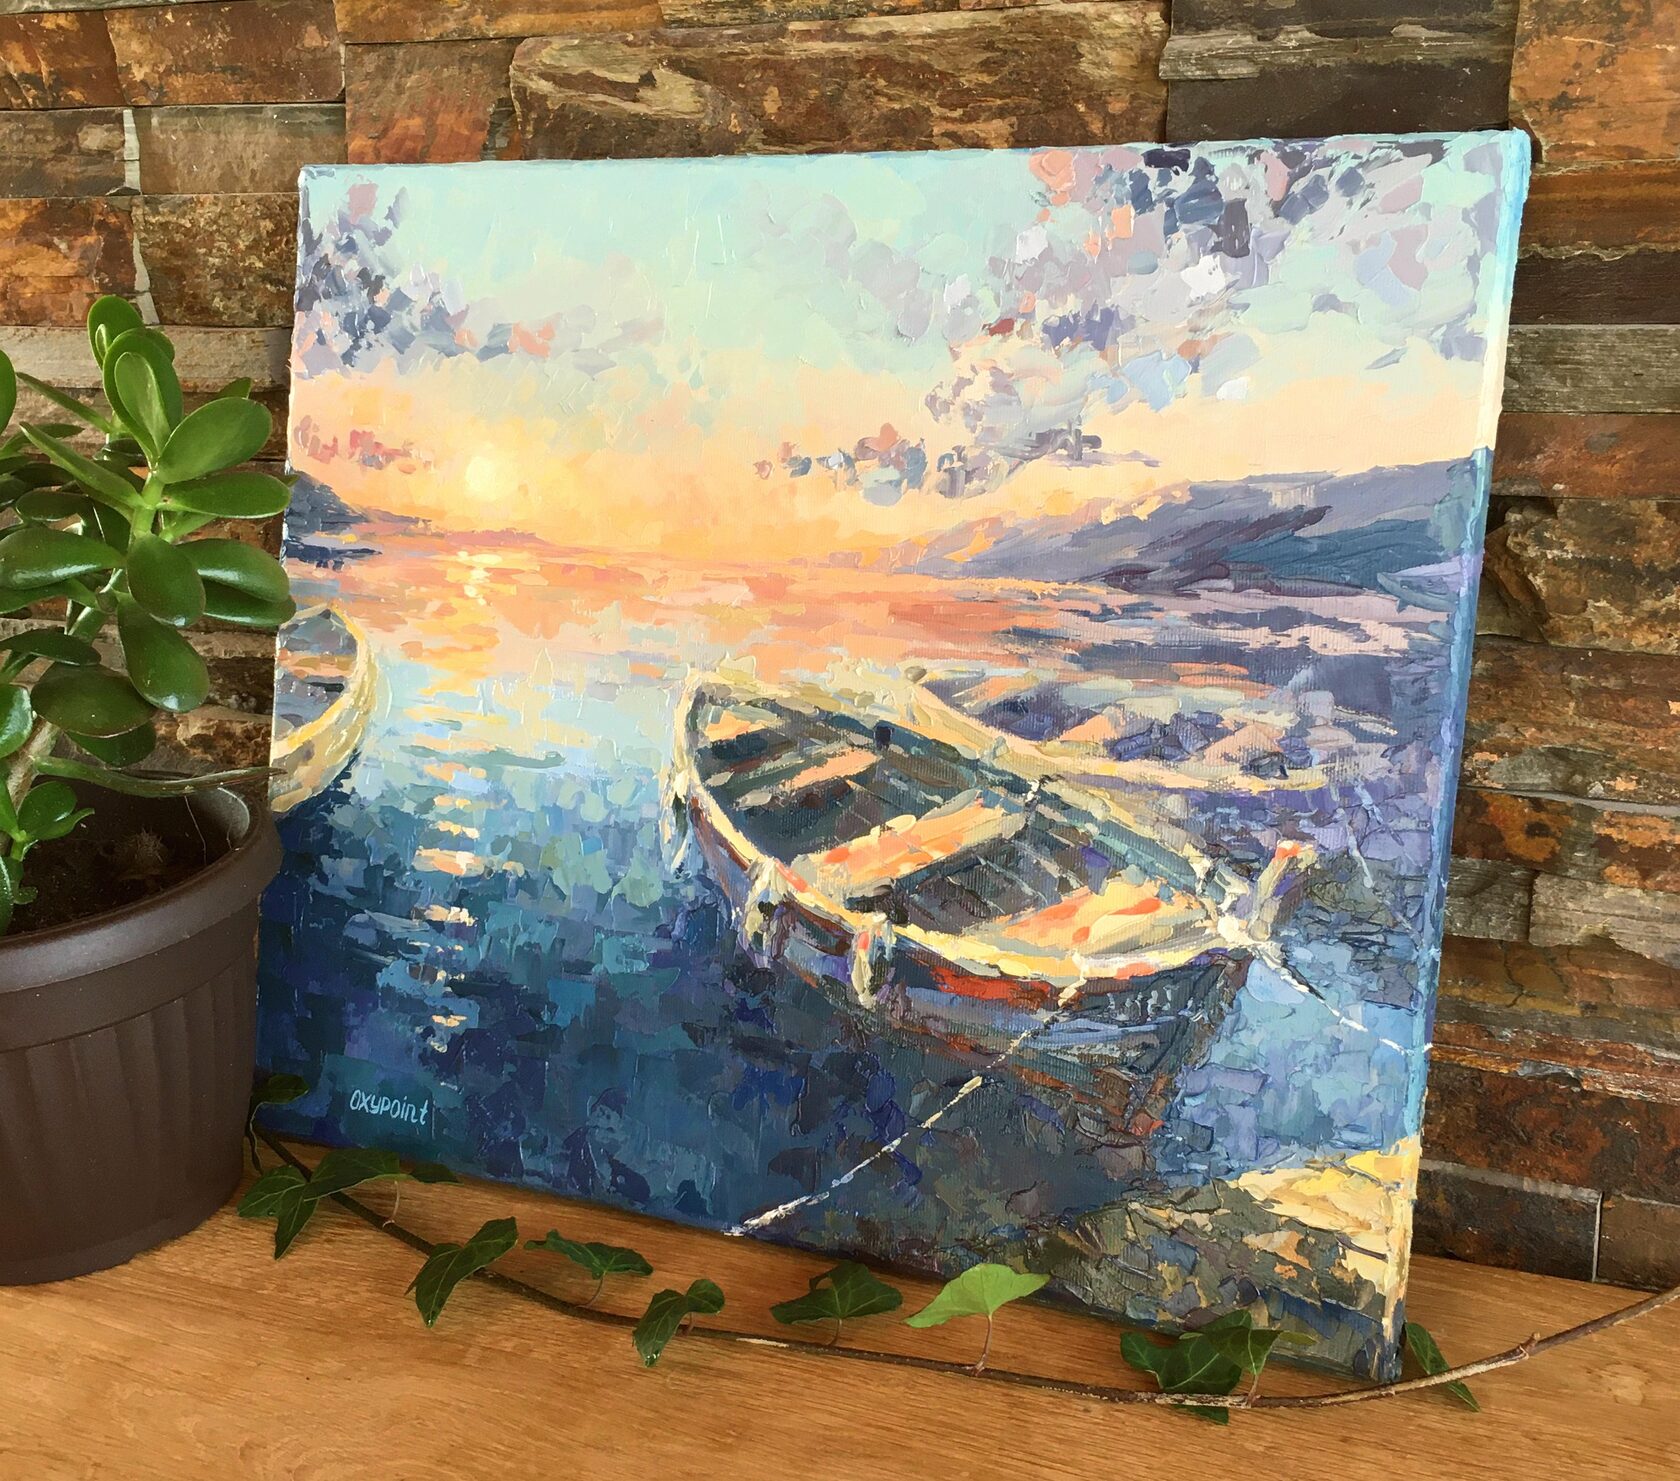 Boats at sunset oil painting